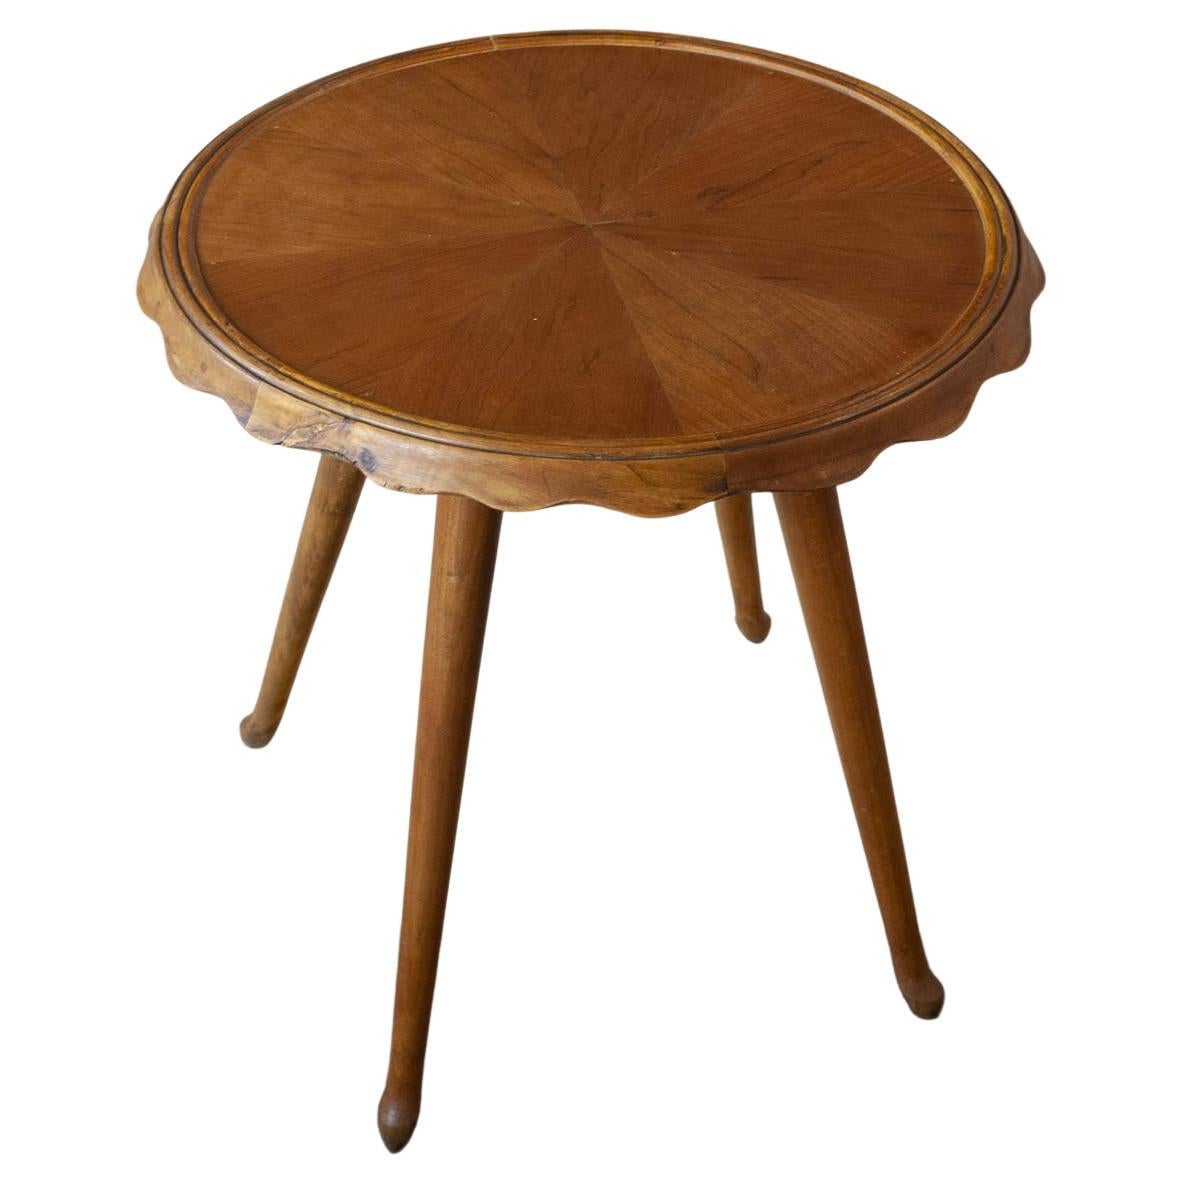 Circular worked wood coffee table design Paolo Buffa production early 1950s


Paolo Buffa is considered one of the most influential architects in the Milan area. Although he also devoted himself to the creation of architectural works, mainly